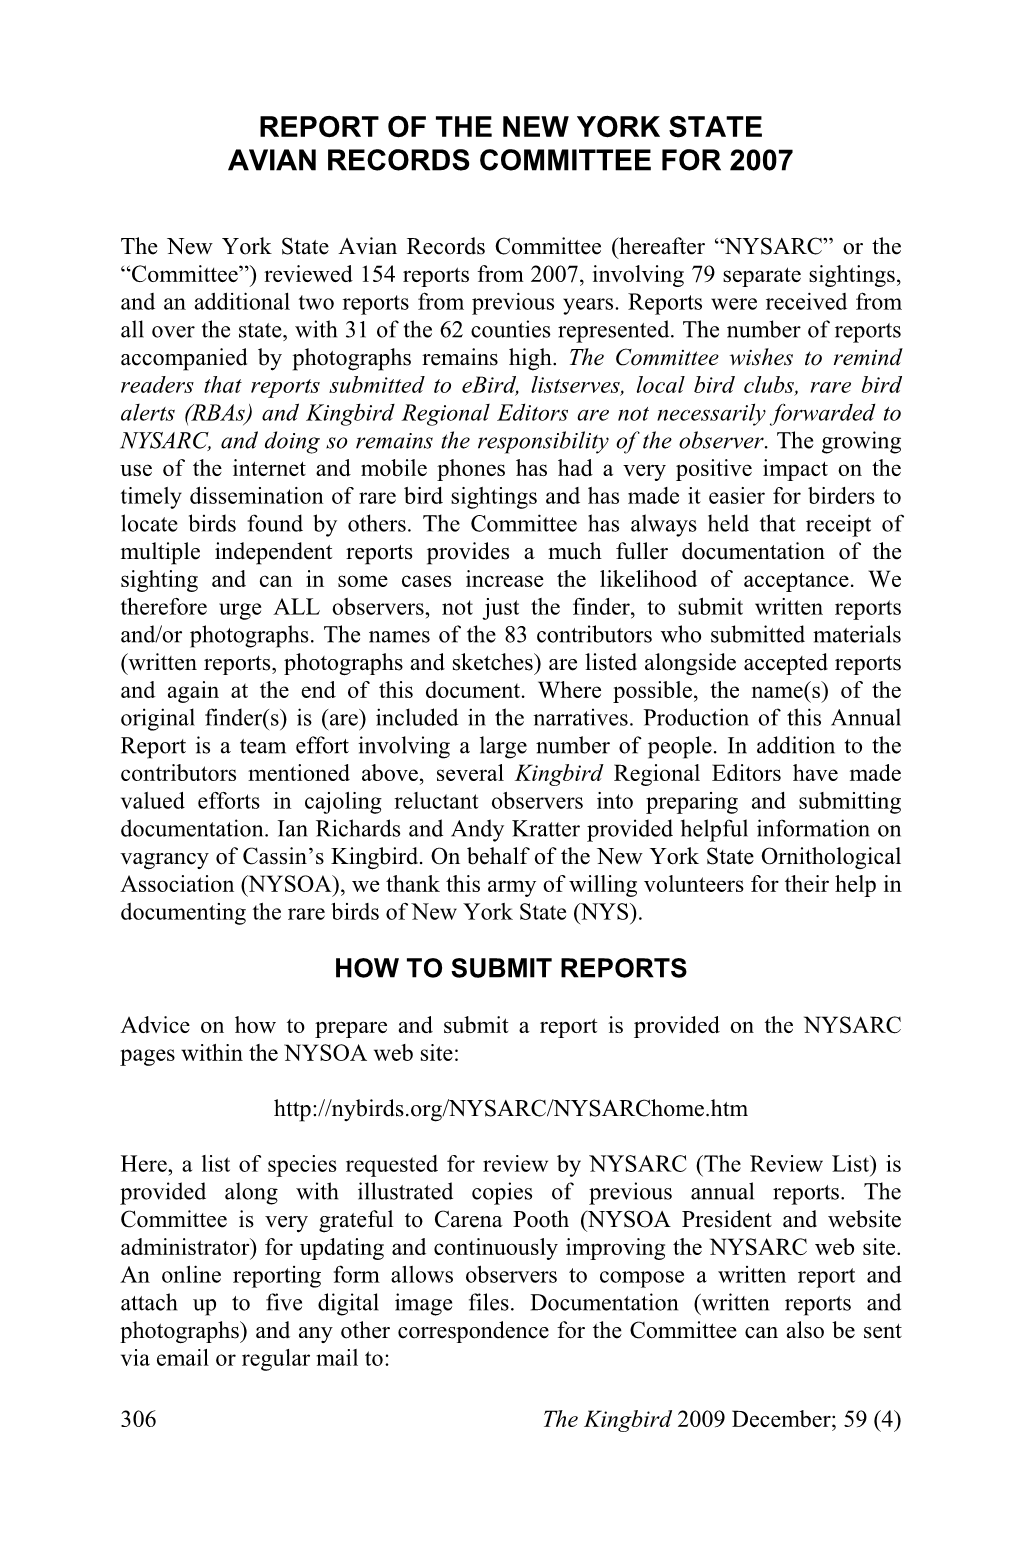 Report of the New York State Avian Records Committee for 2007